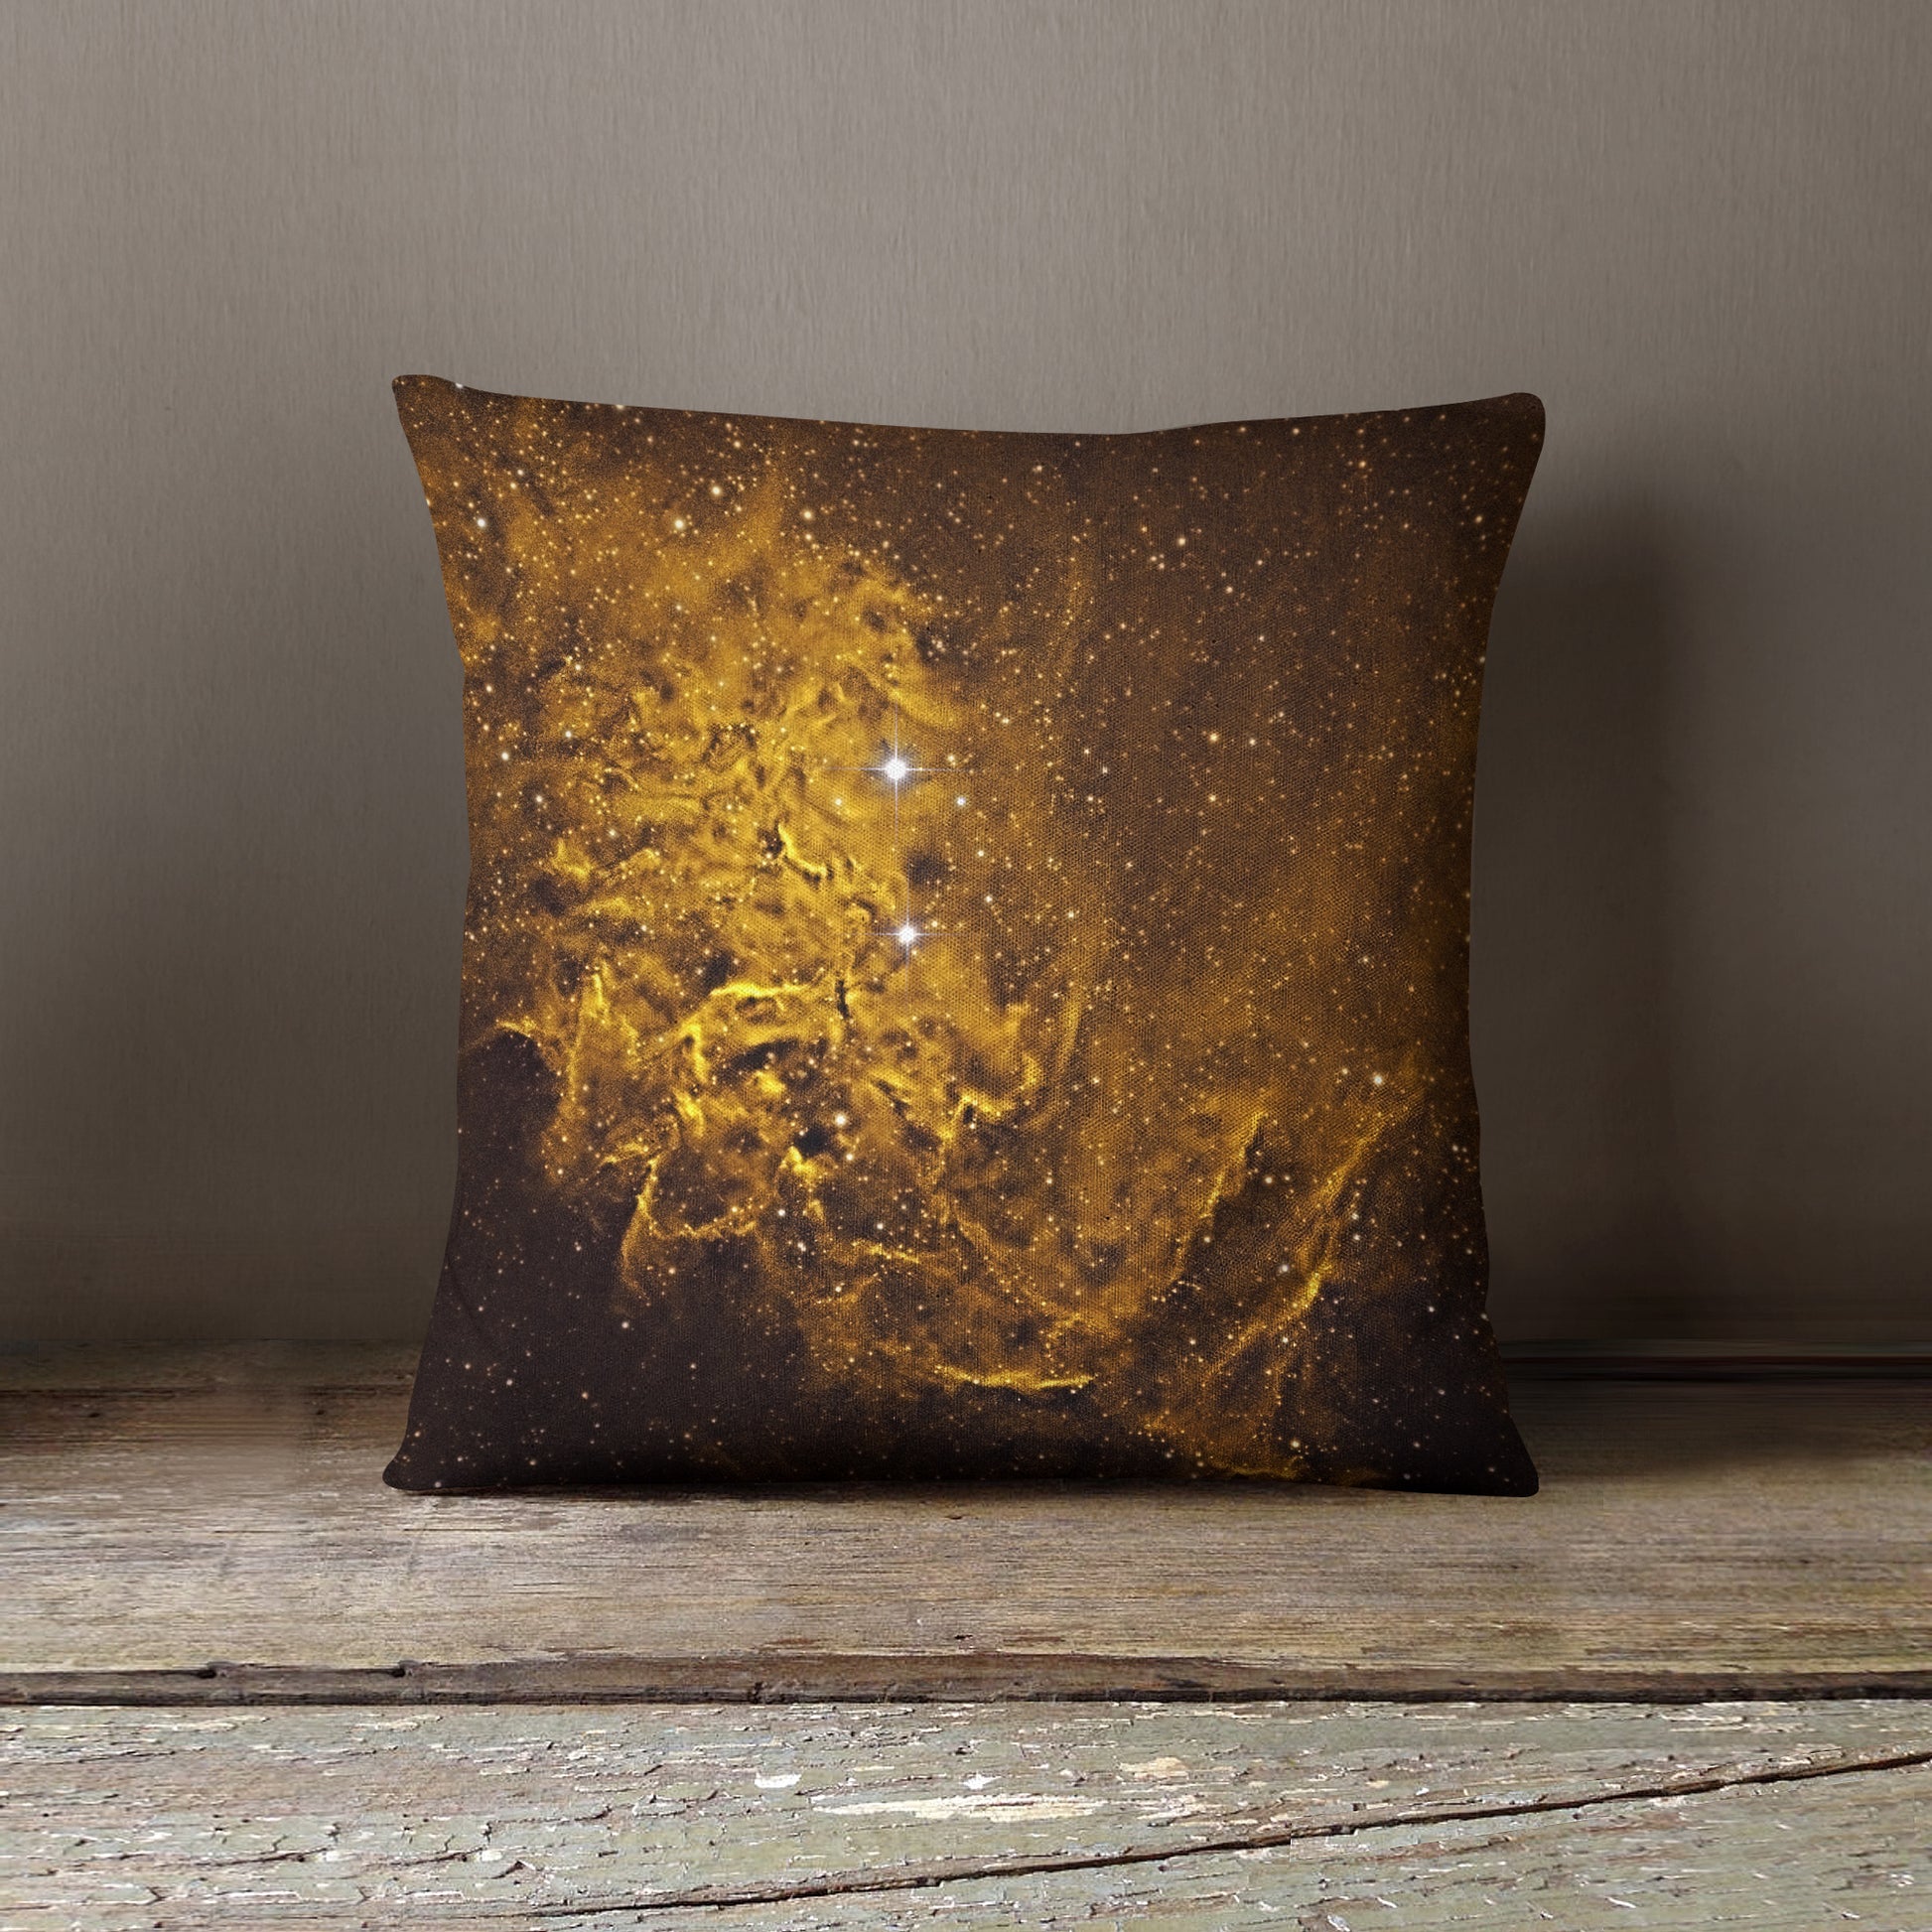 Space Cushion - Flaming Gold Star - The Tiny Art Co